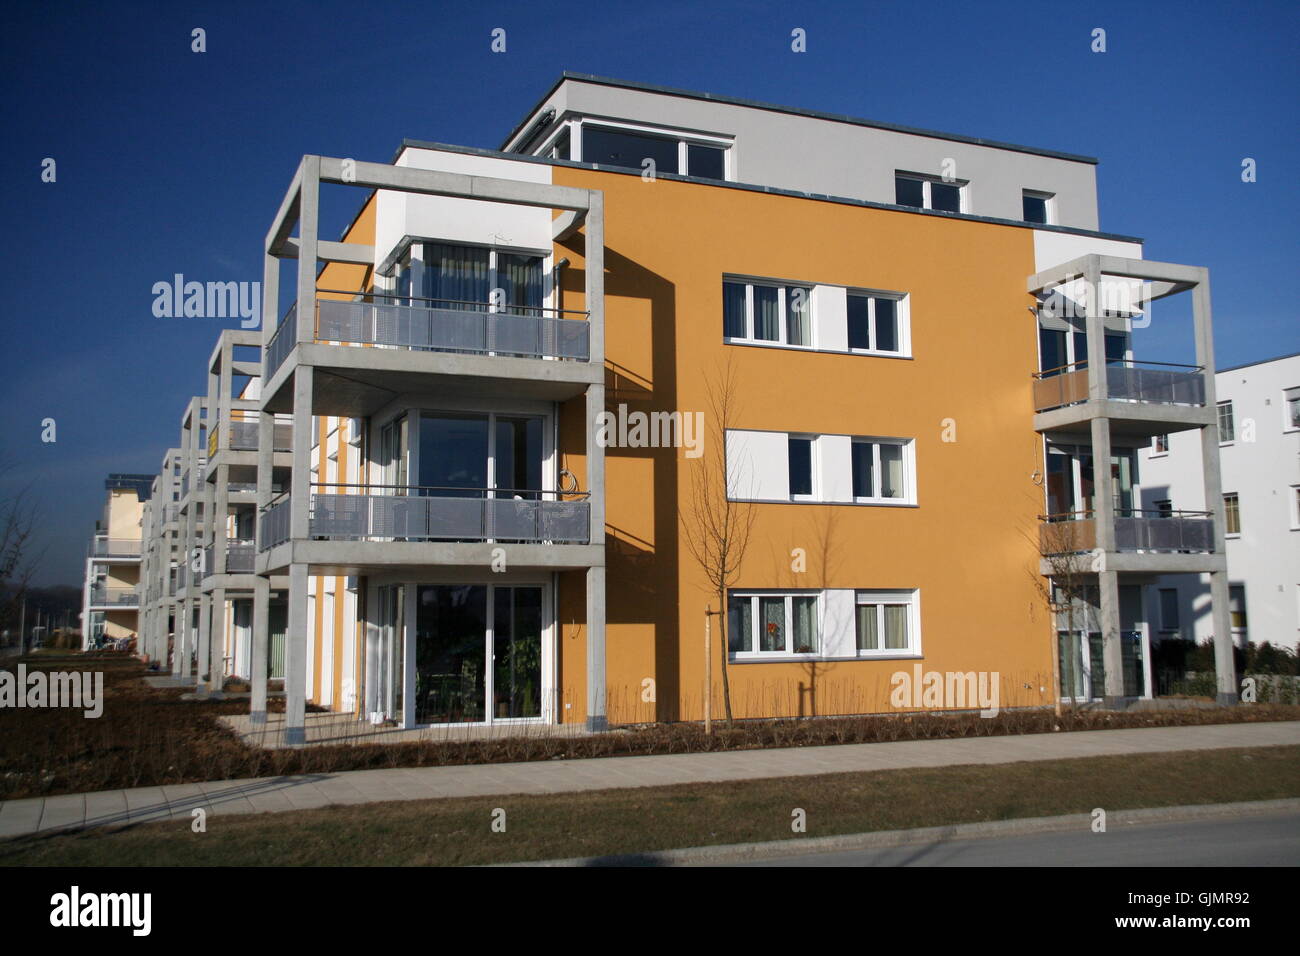 multiple family dwelling house building Stock Photo